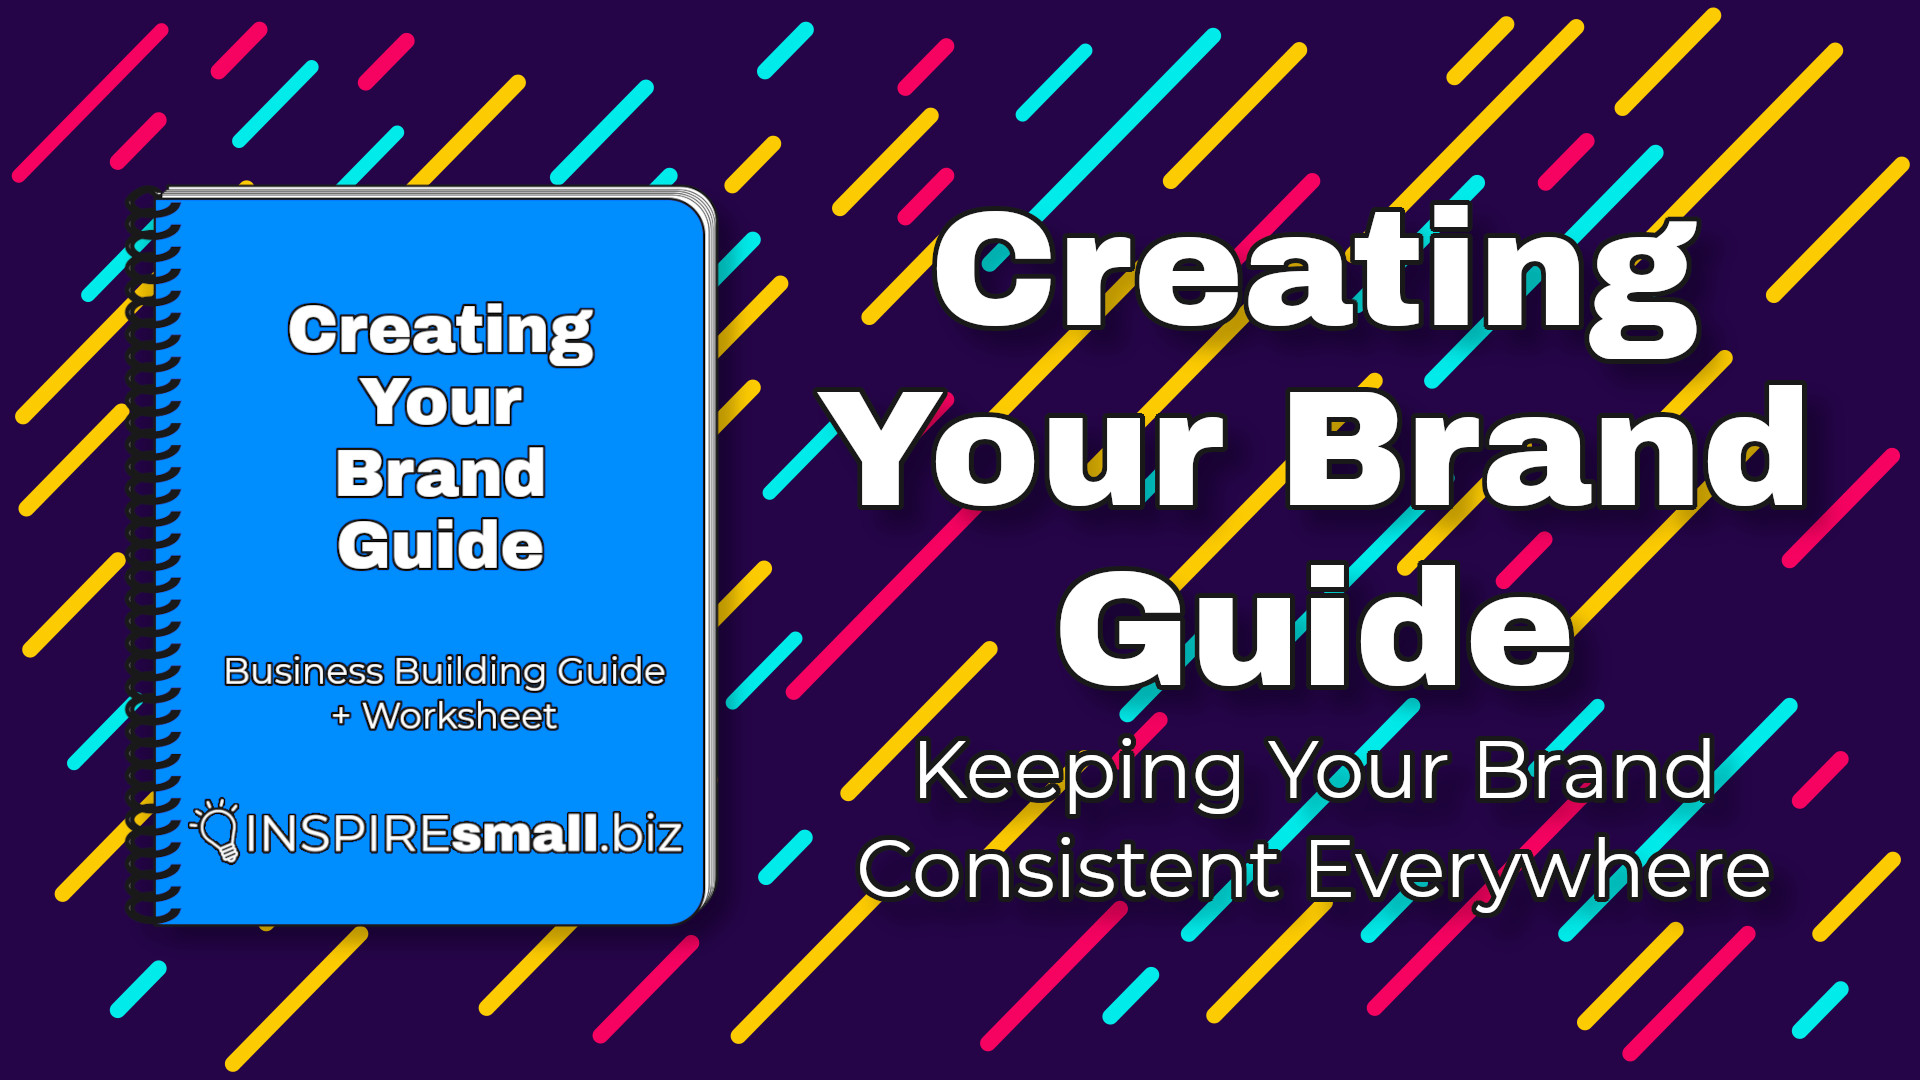 Creating Your Brand Guide